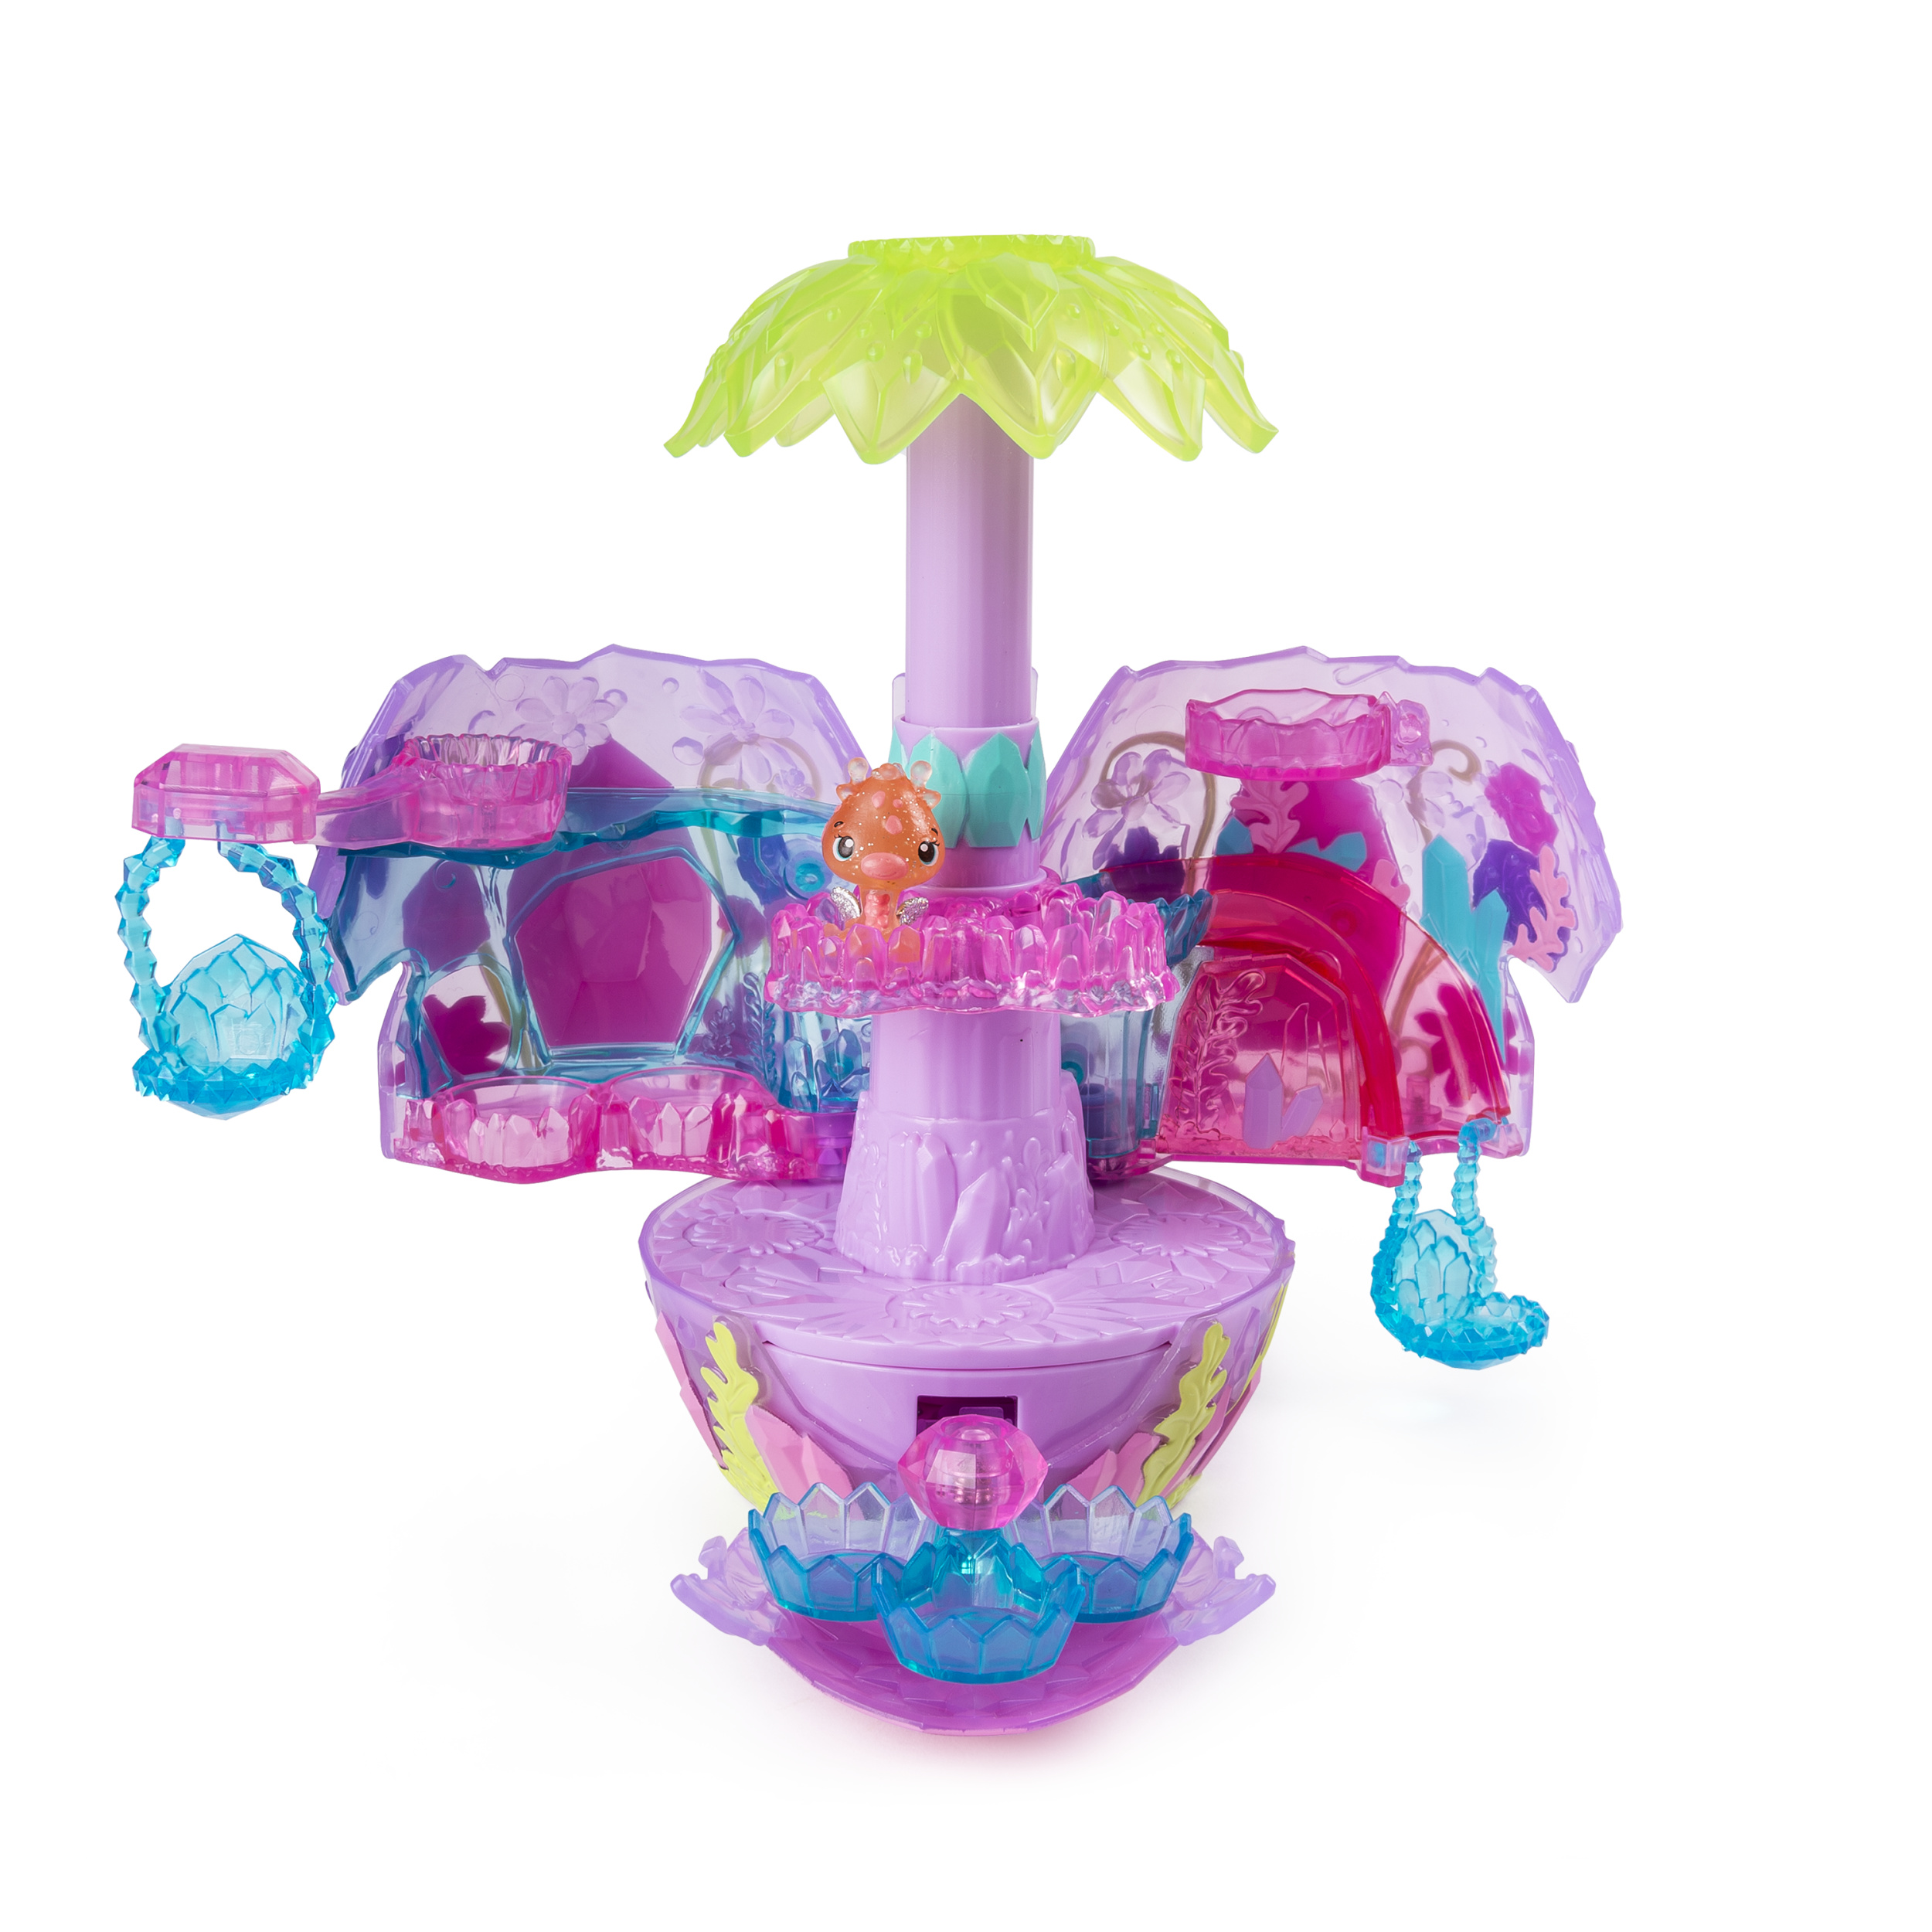 Hatchimals CollEGGtibles, Crystal Canyon Secret Scene Playset with Exclusive Hatchimals CollEGGtible - image 1 of 8